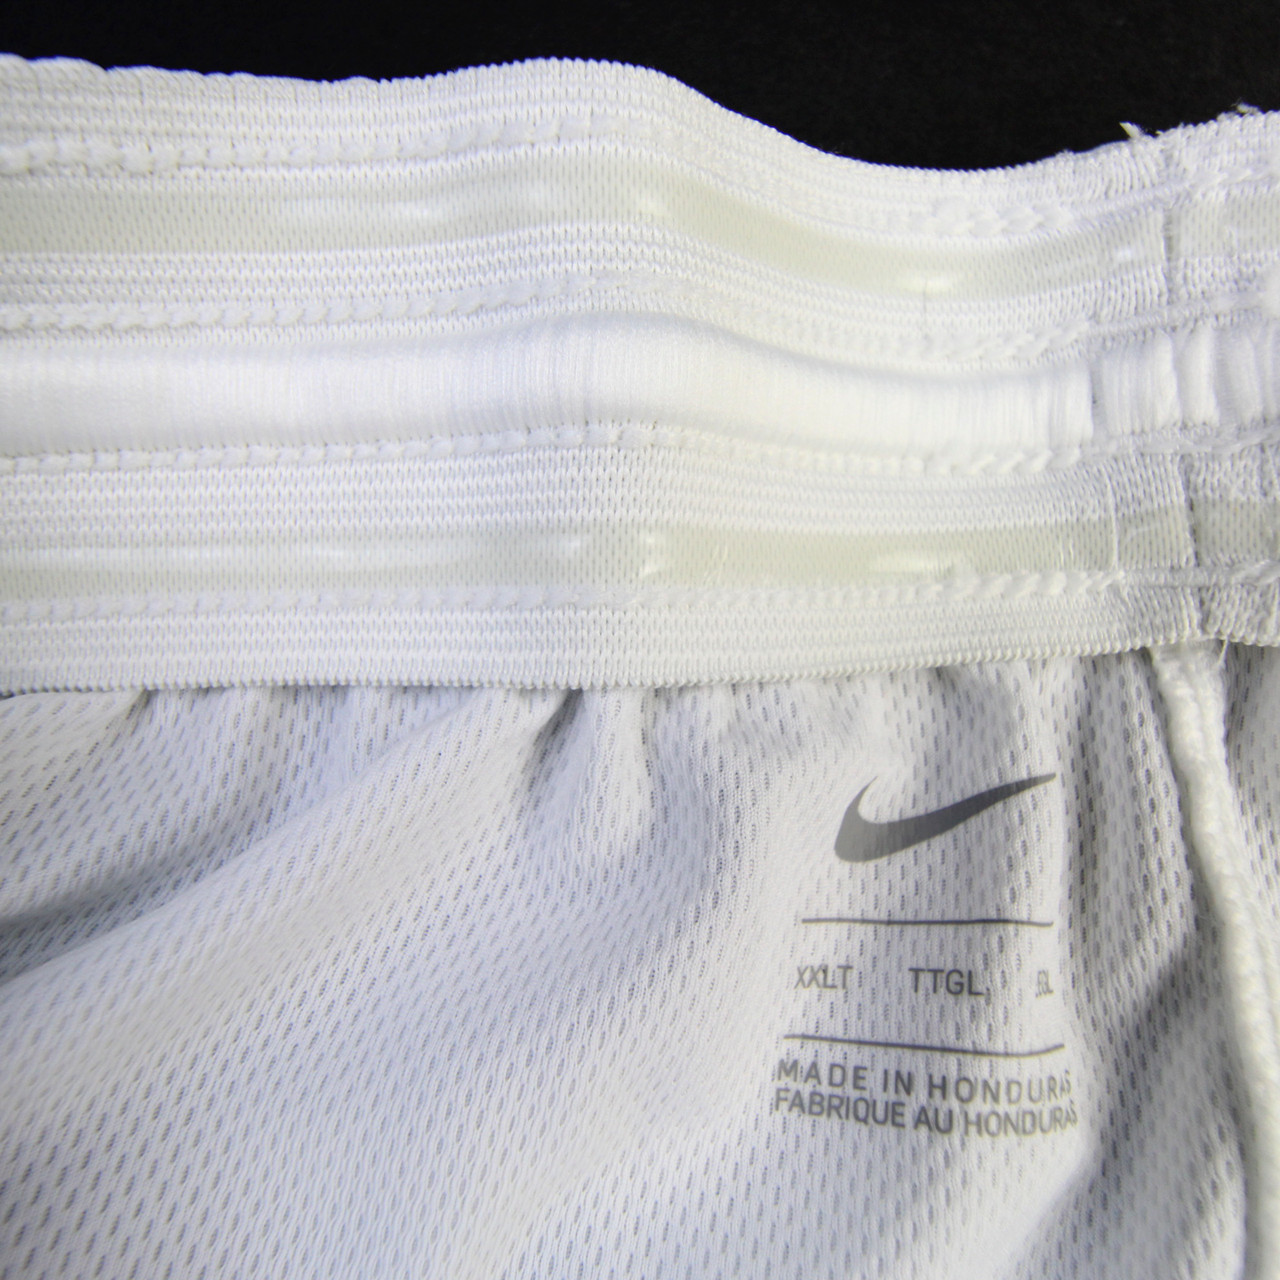 NIKE Men's NBA Issued NBA Basketball Compression Shorts 3XLT All White *NEW*